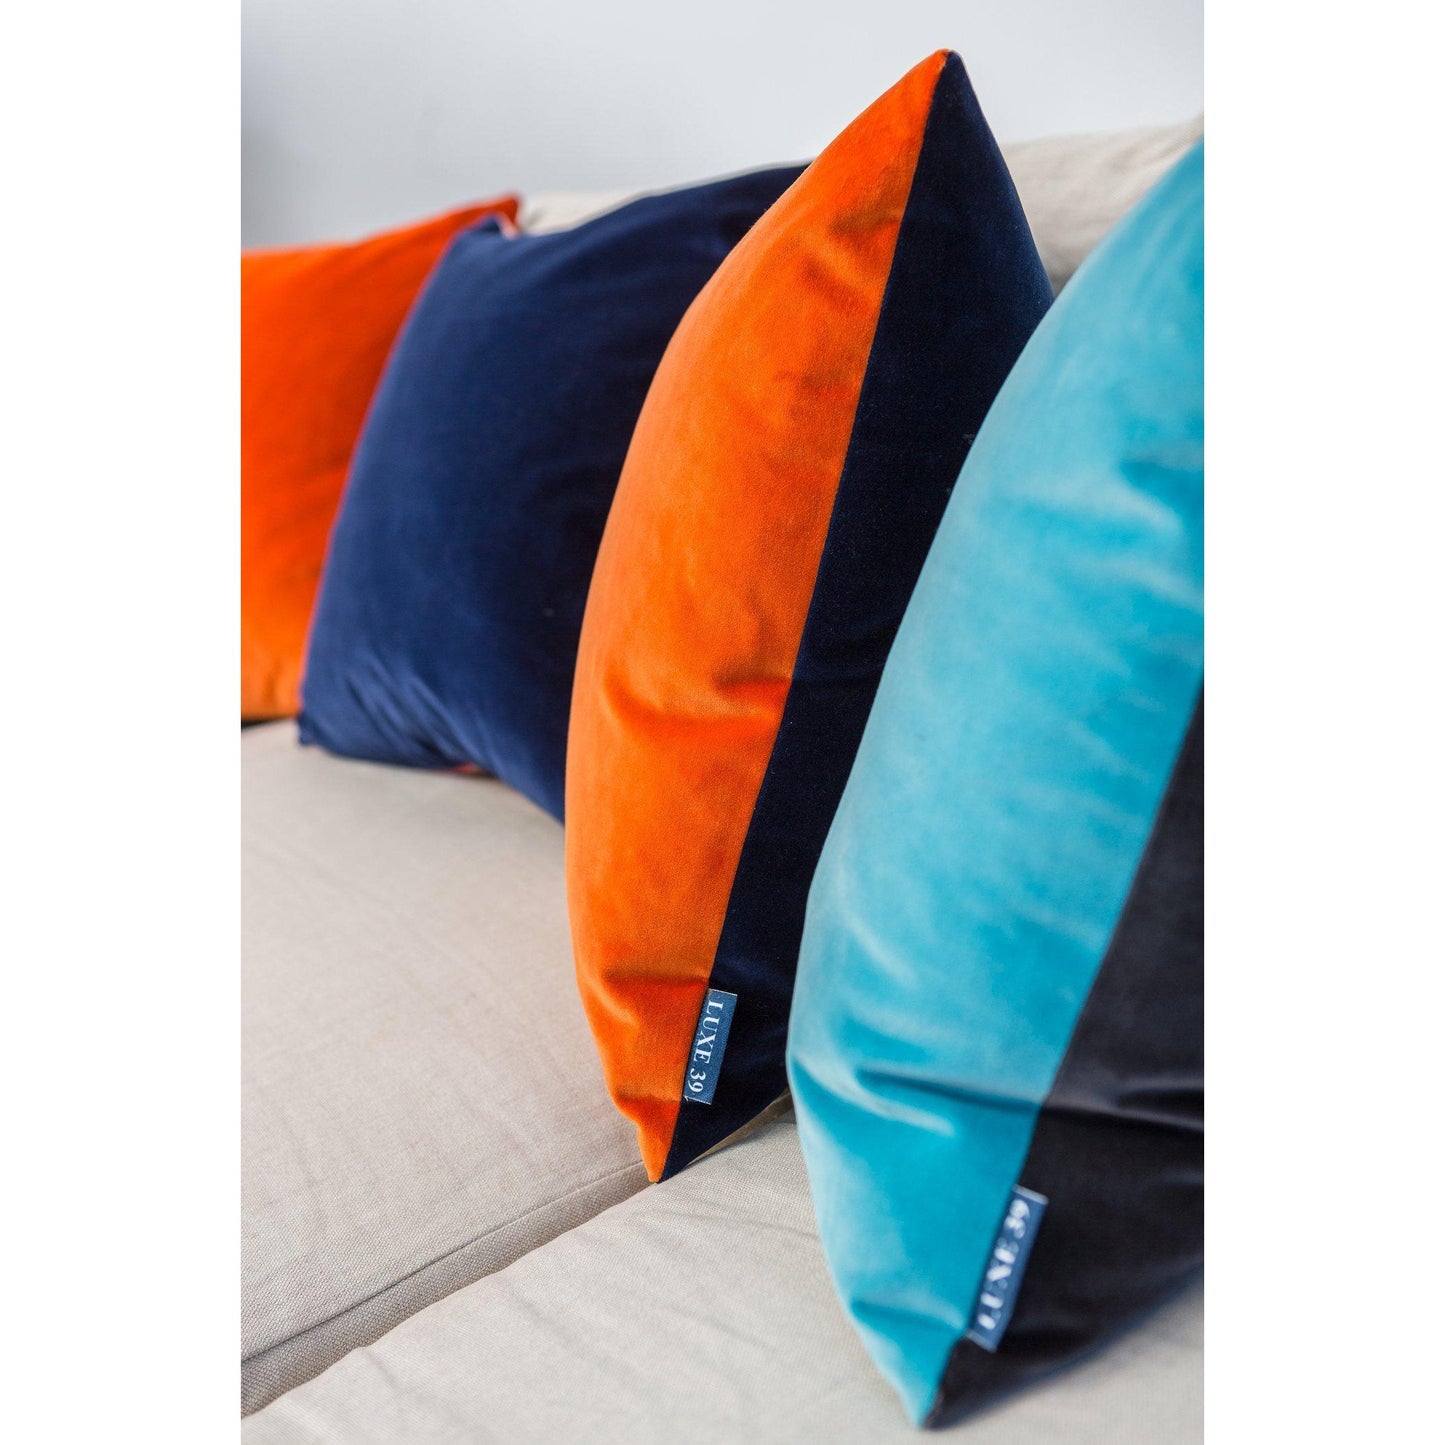 Turquoise Velvet Cushion Cover with Navy